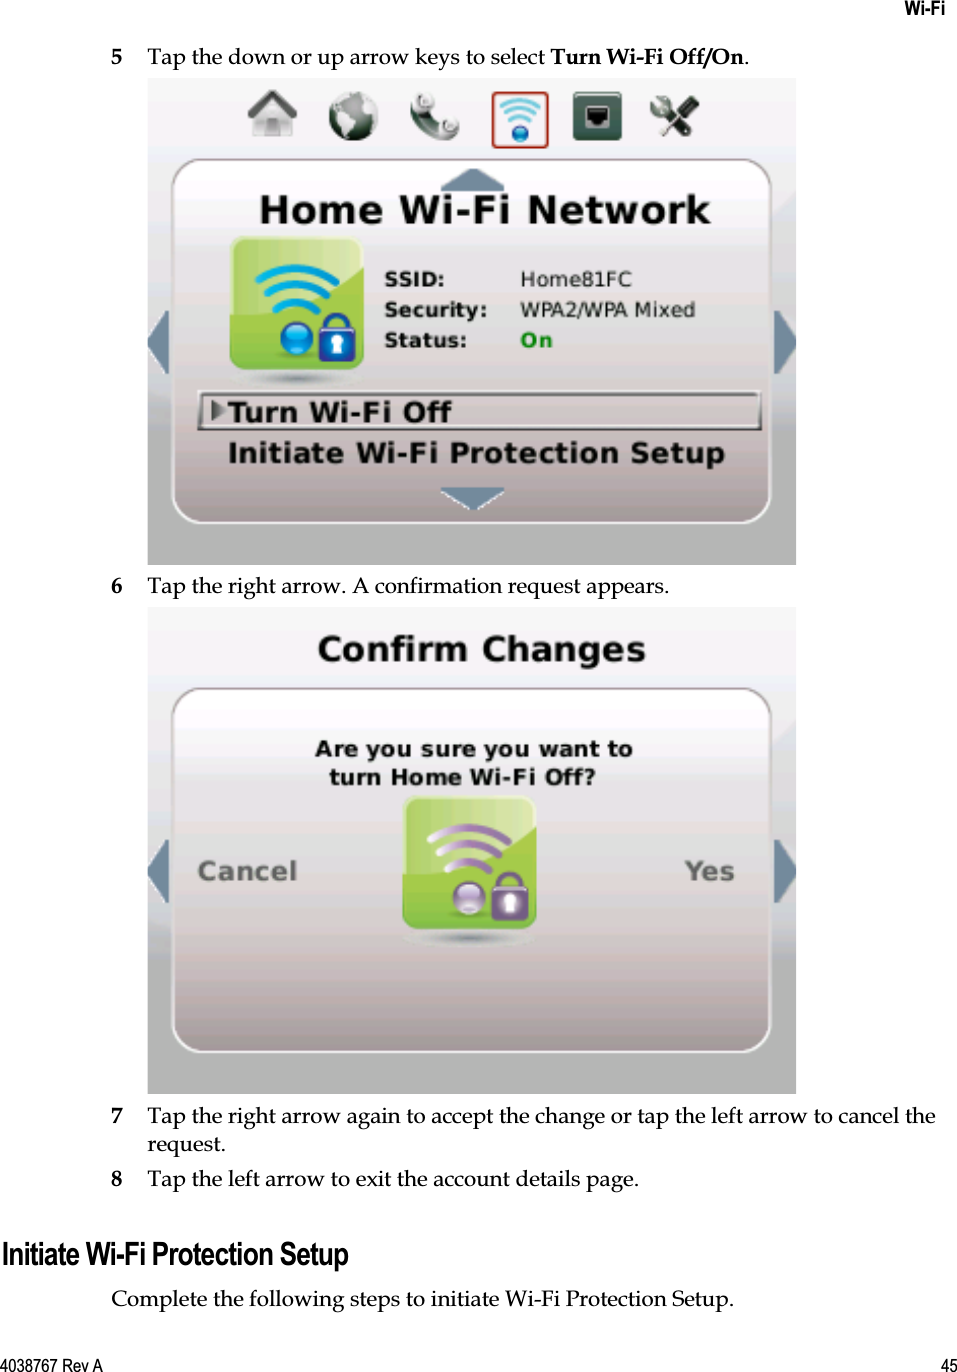    Wi-Fi  4038767 Rev A  45  5 Tap the down or up arrow keys to select Turn Wi-Fi Off/On.  6 Tap the right arrow. A confirmation request appears.  7 Tap the right arrow again to accept the change or tap the left arrow to cancel the request. 8 Tap the left arrow to exit the account details page.  Initiate Wi-Fi Protection Setup Complete the following steps to initiate Wi-Fi Protection Setup. 